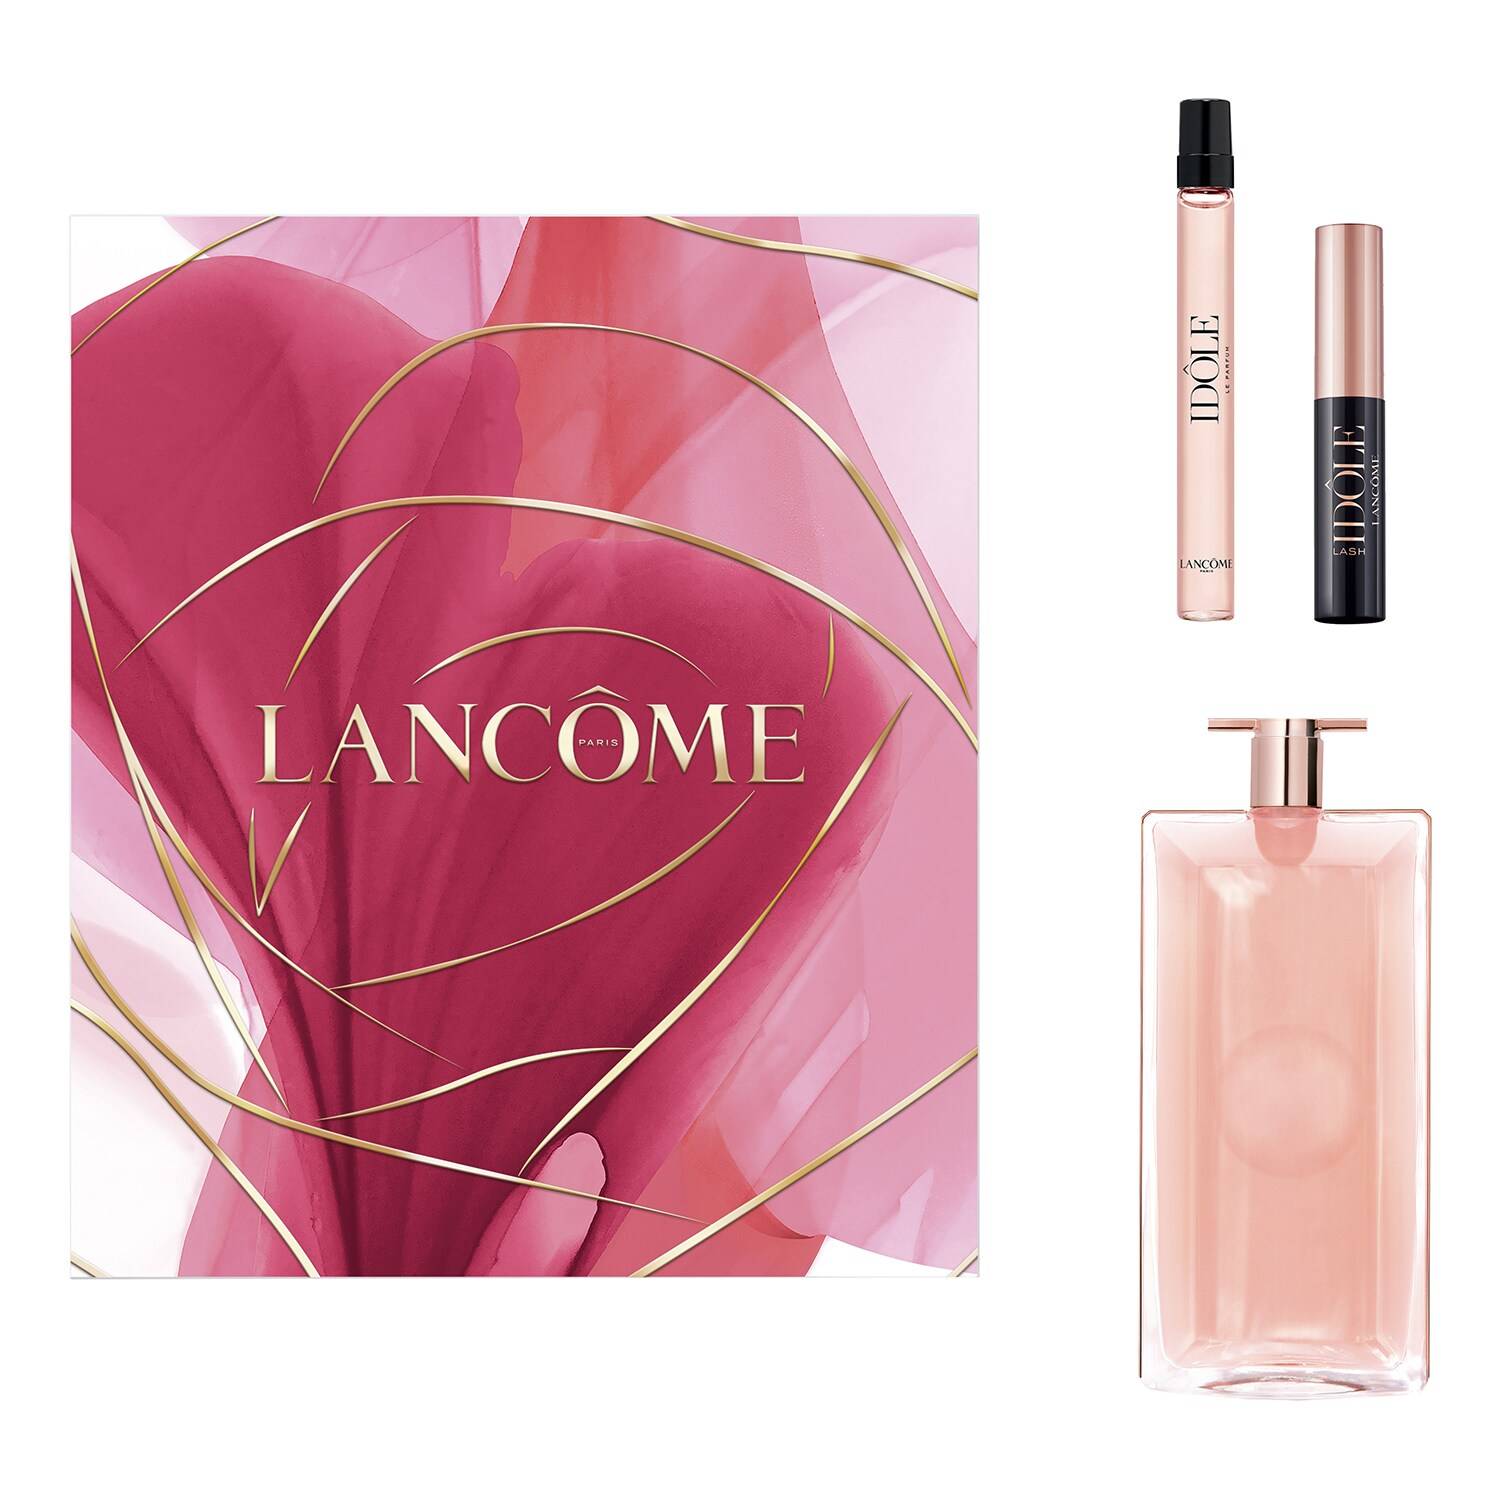 LANC�ME Id�le Fragrance Mother's Day Limited Edition Gift Set